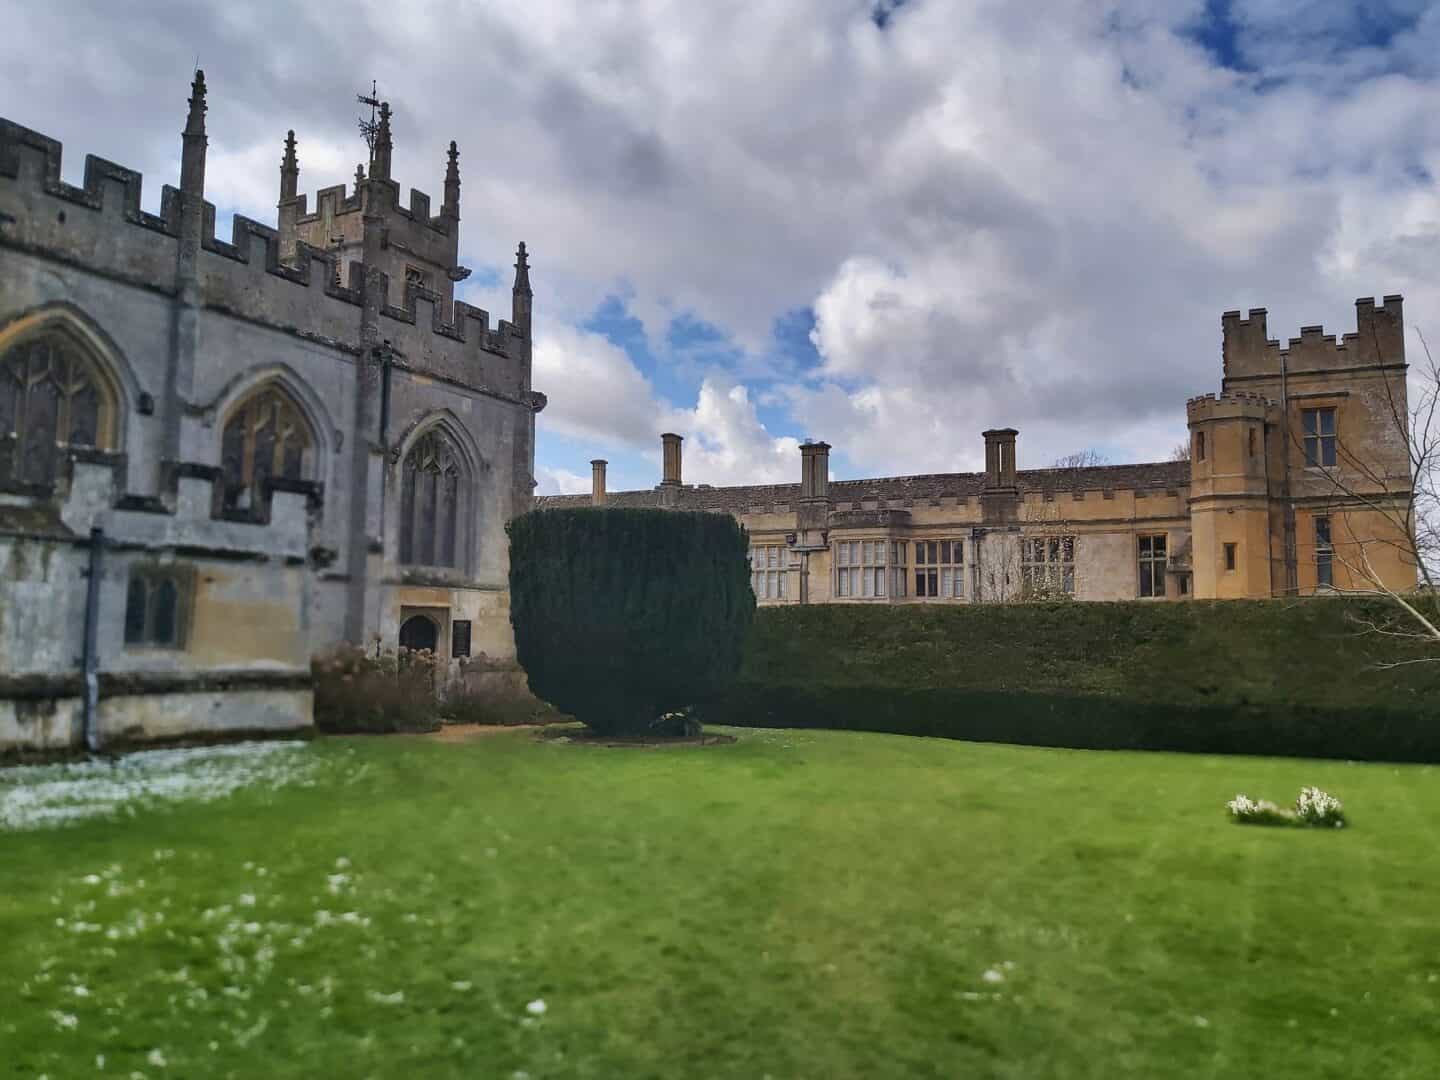 St Mary's Church in Sudeley Castle Gardens with the castle in the background